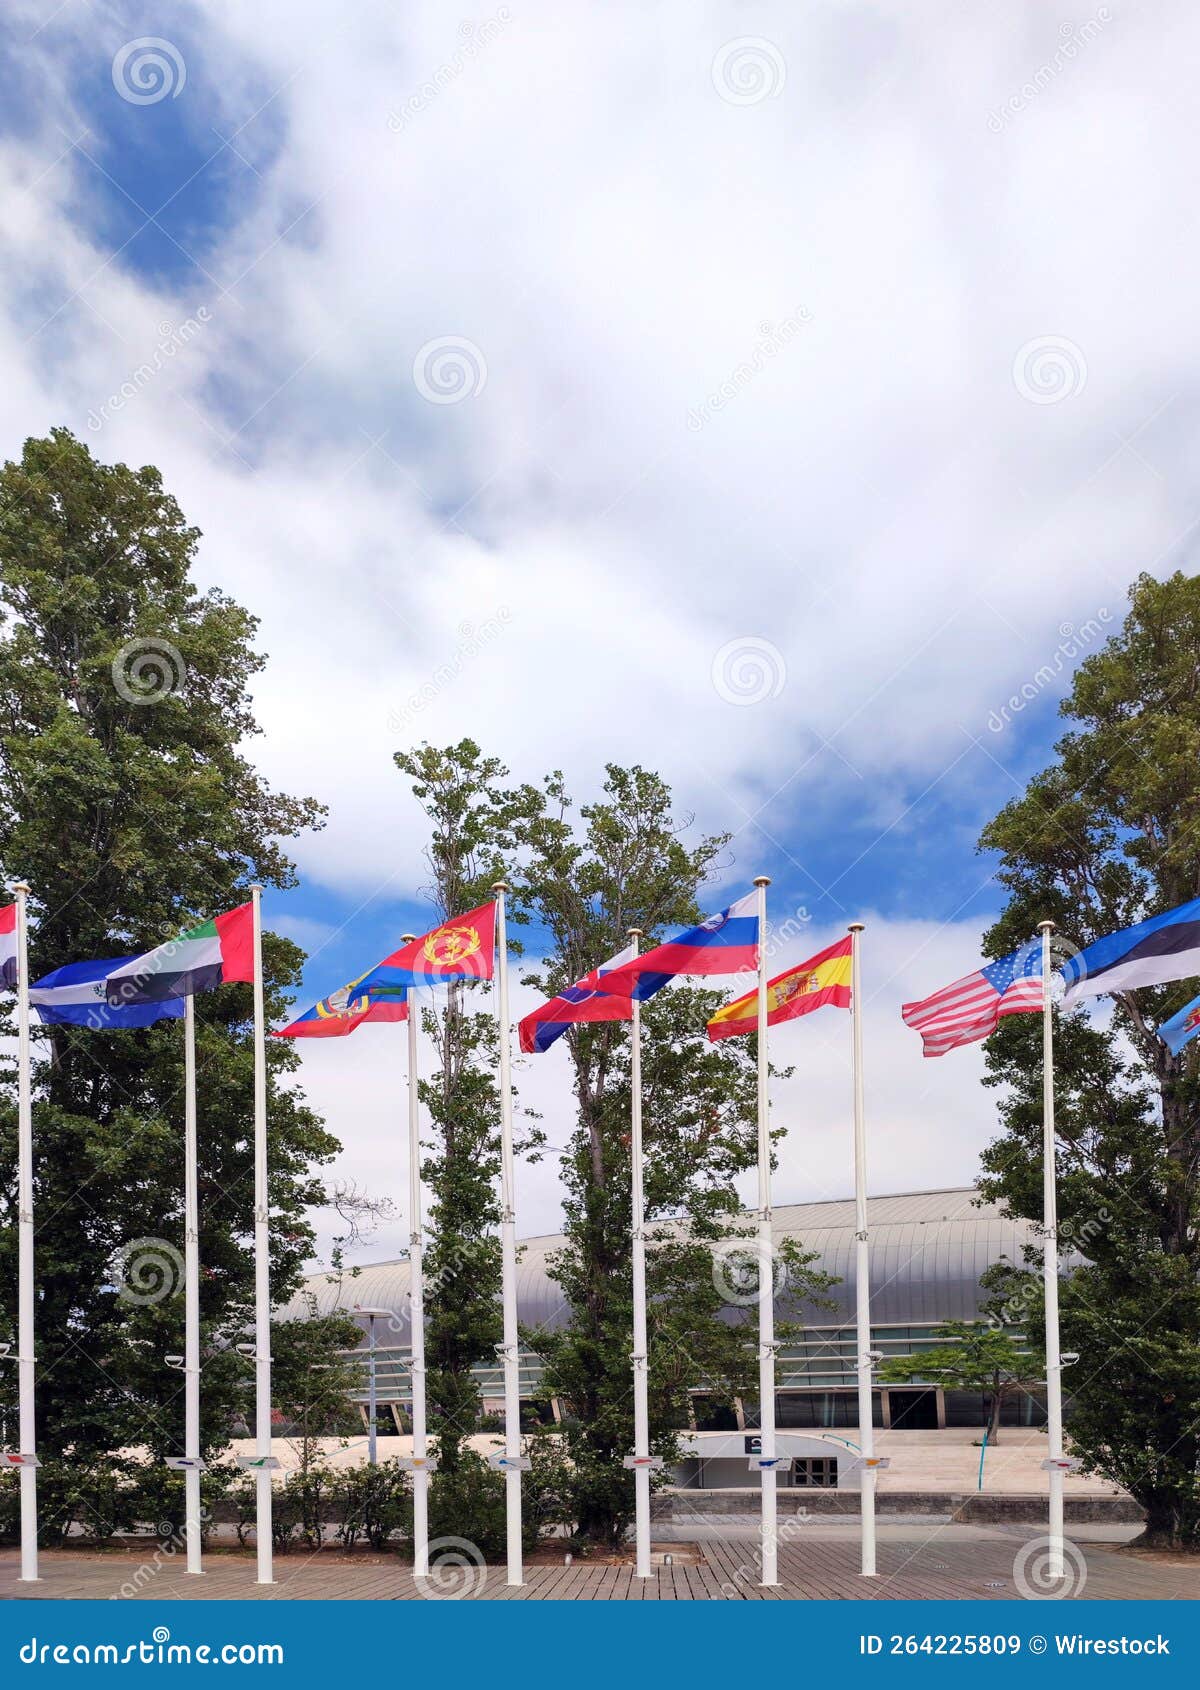 vertical shot of a row of flags of different countries on white pols under a cloudy sky.